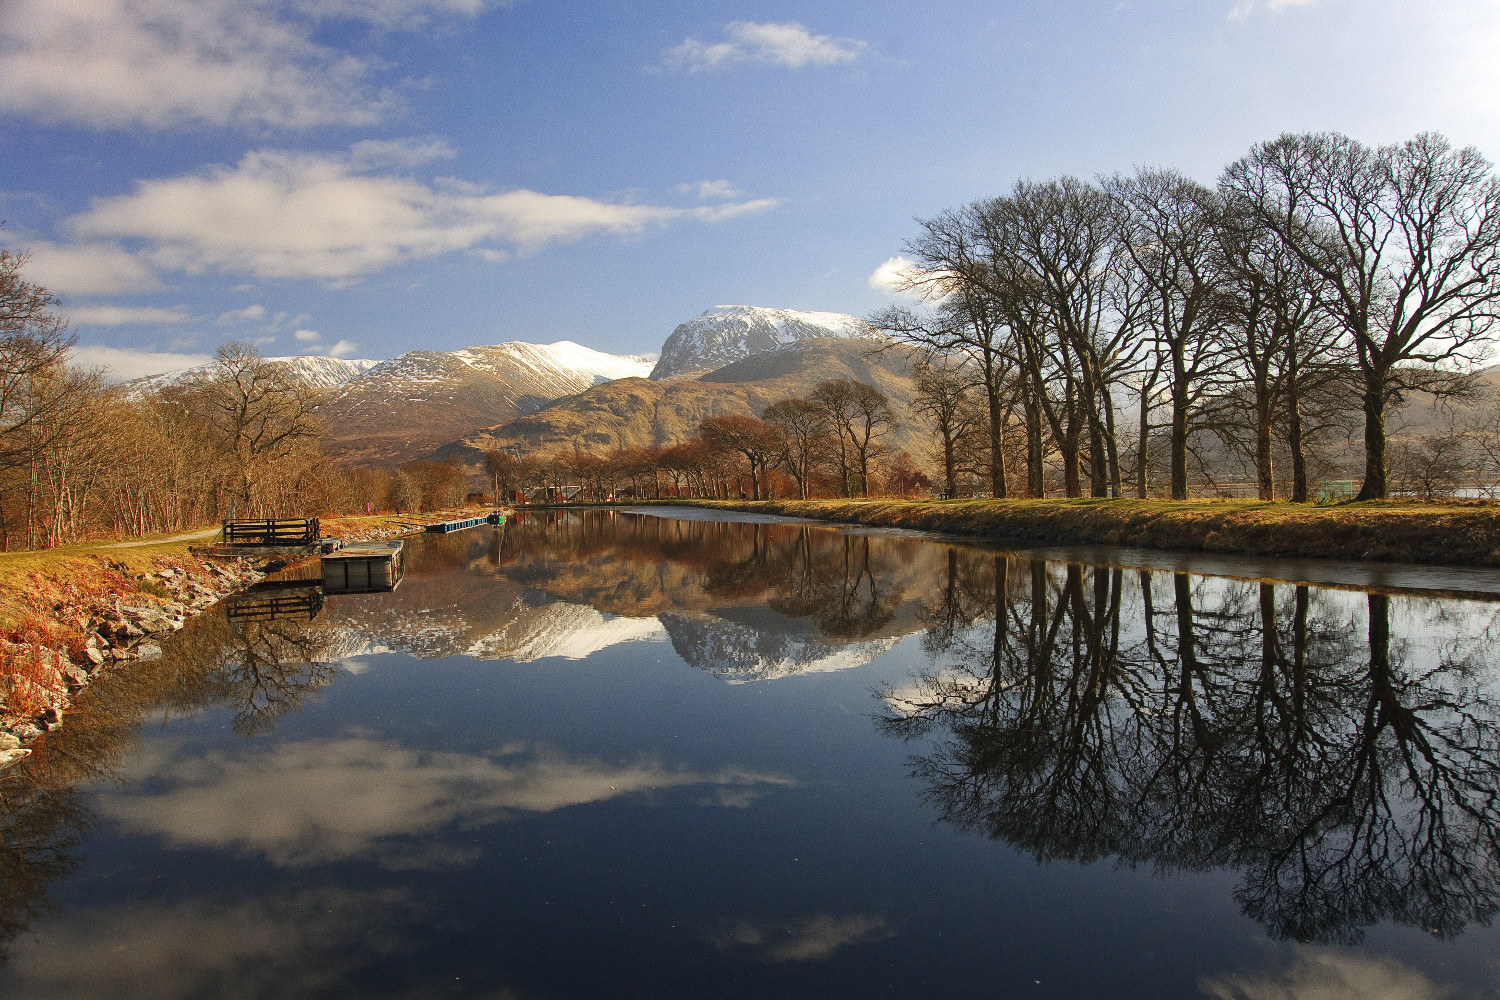 Ben Nevis reflected in the Caledonian Canal. Image by Universal Images Group / Getty